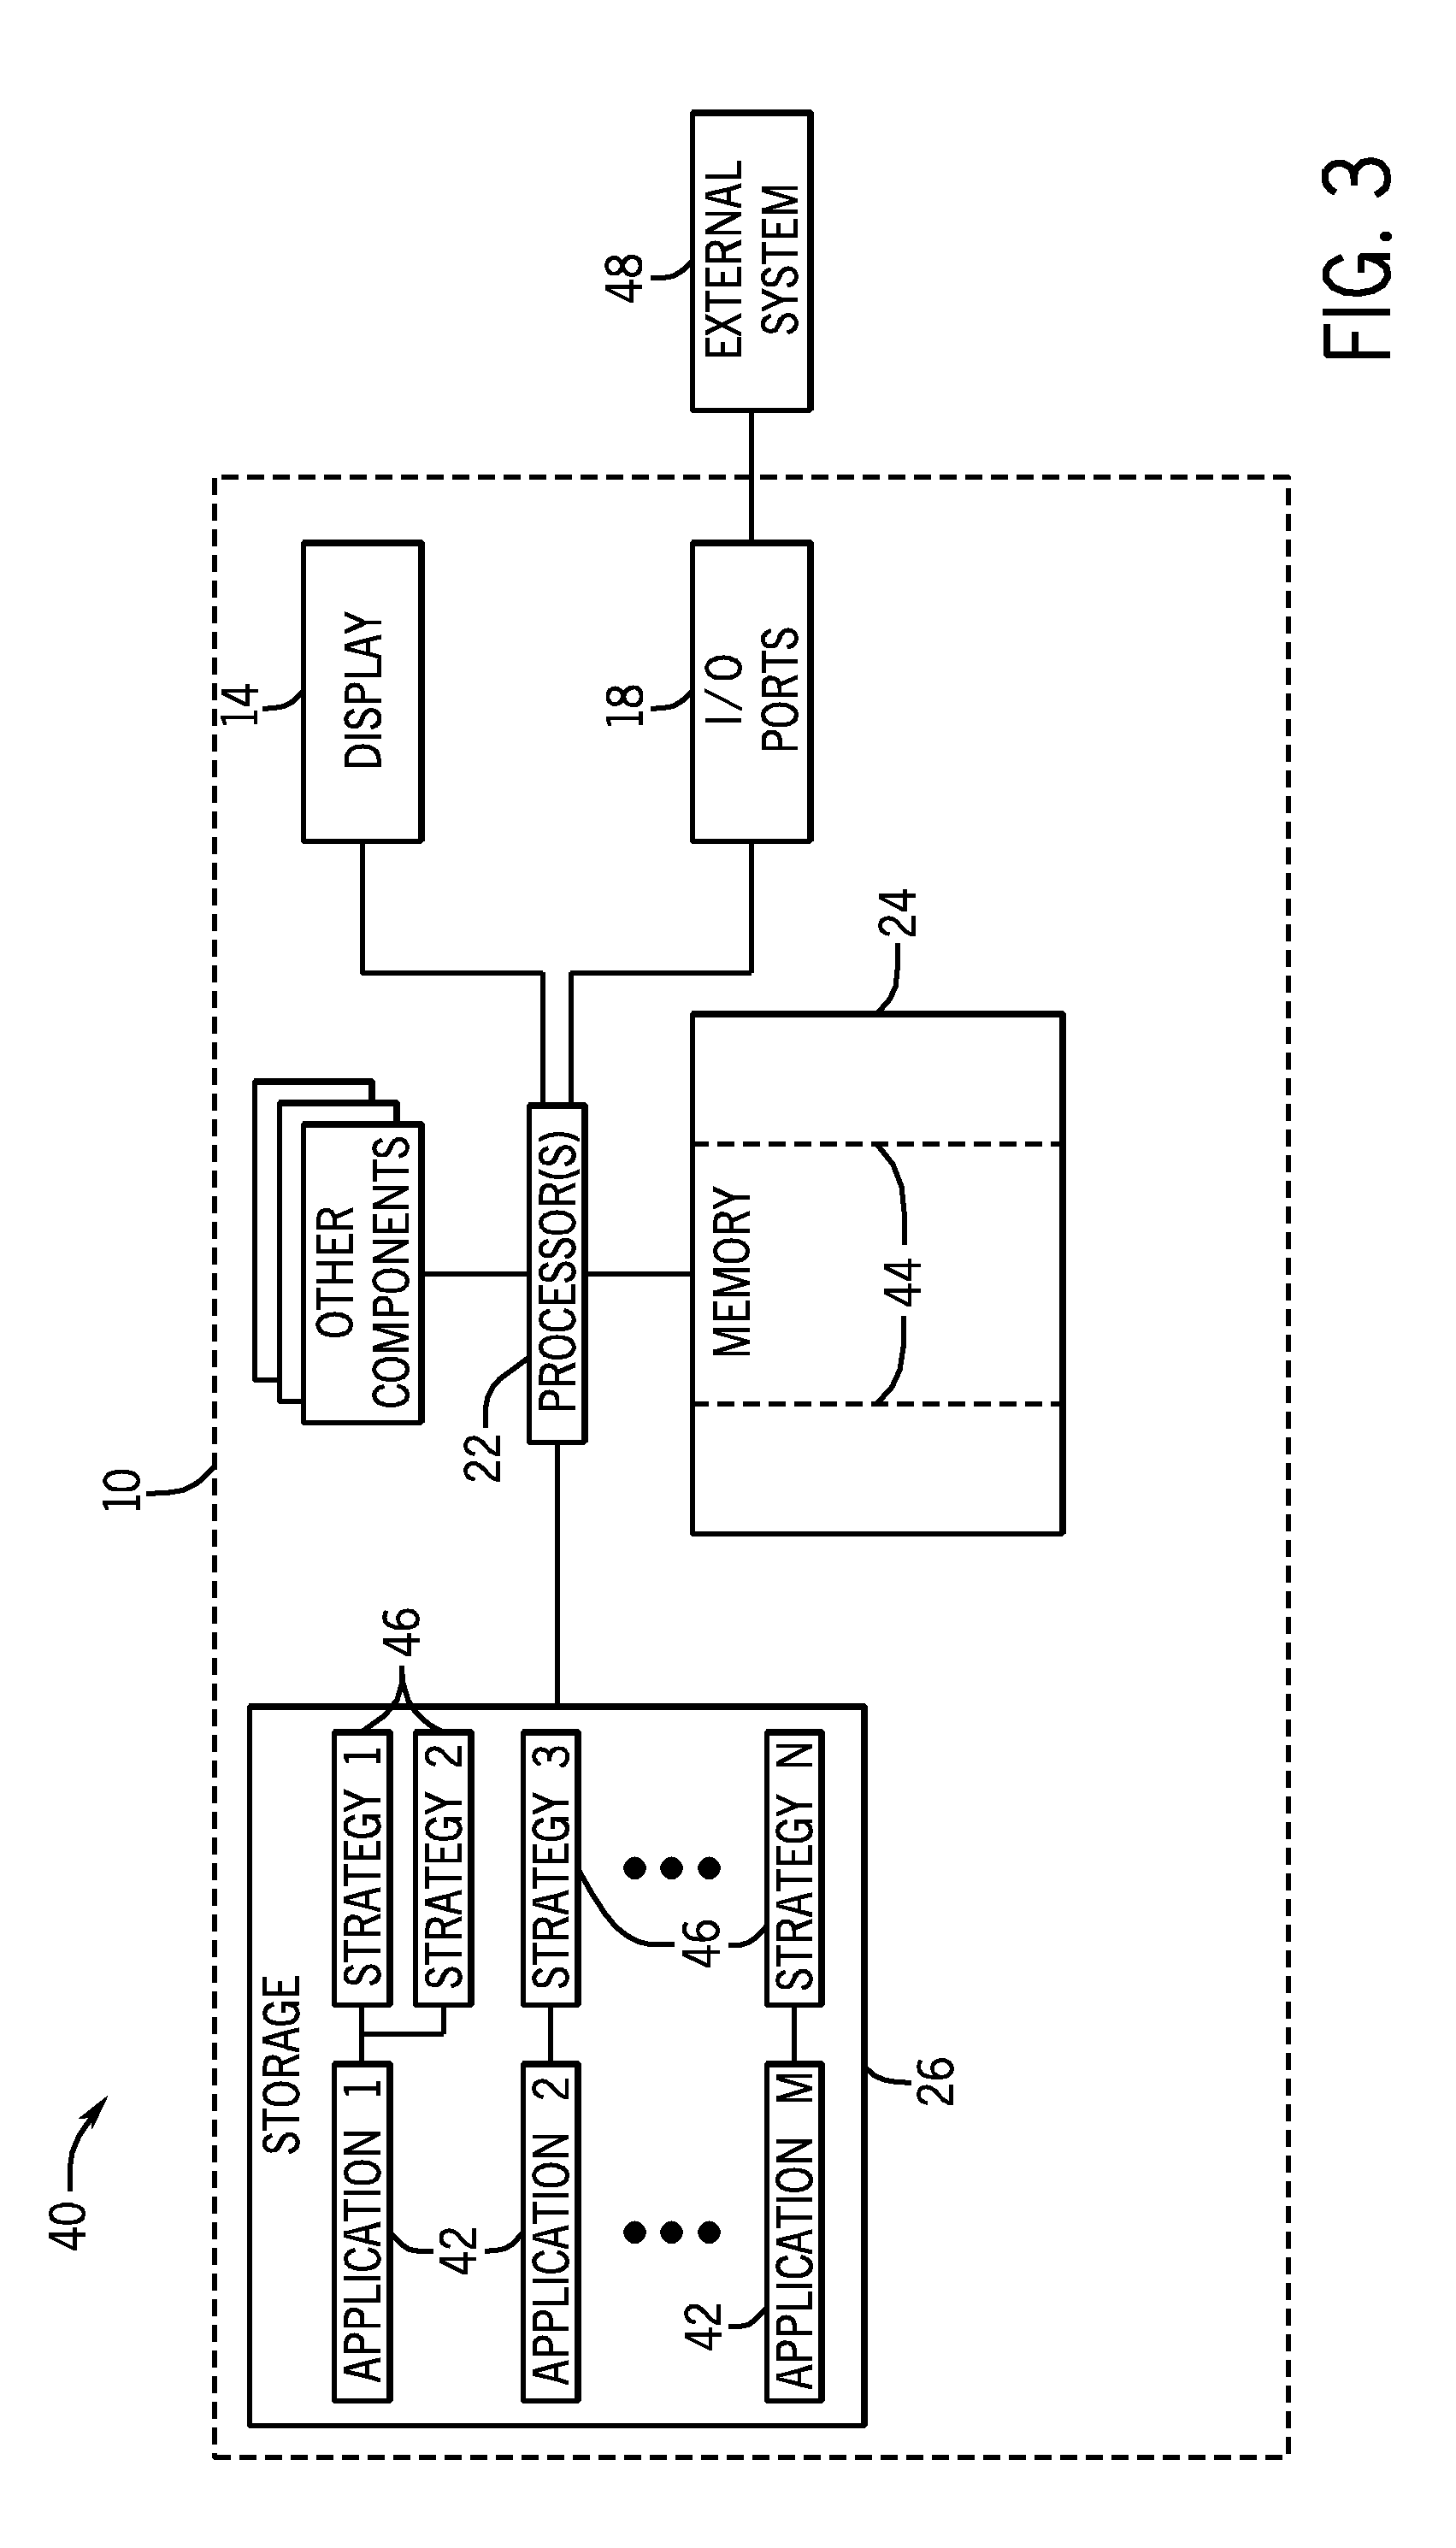 Memory management system and method